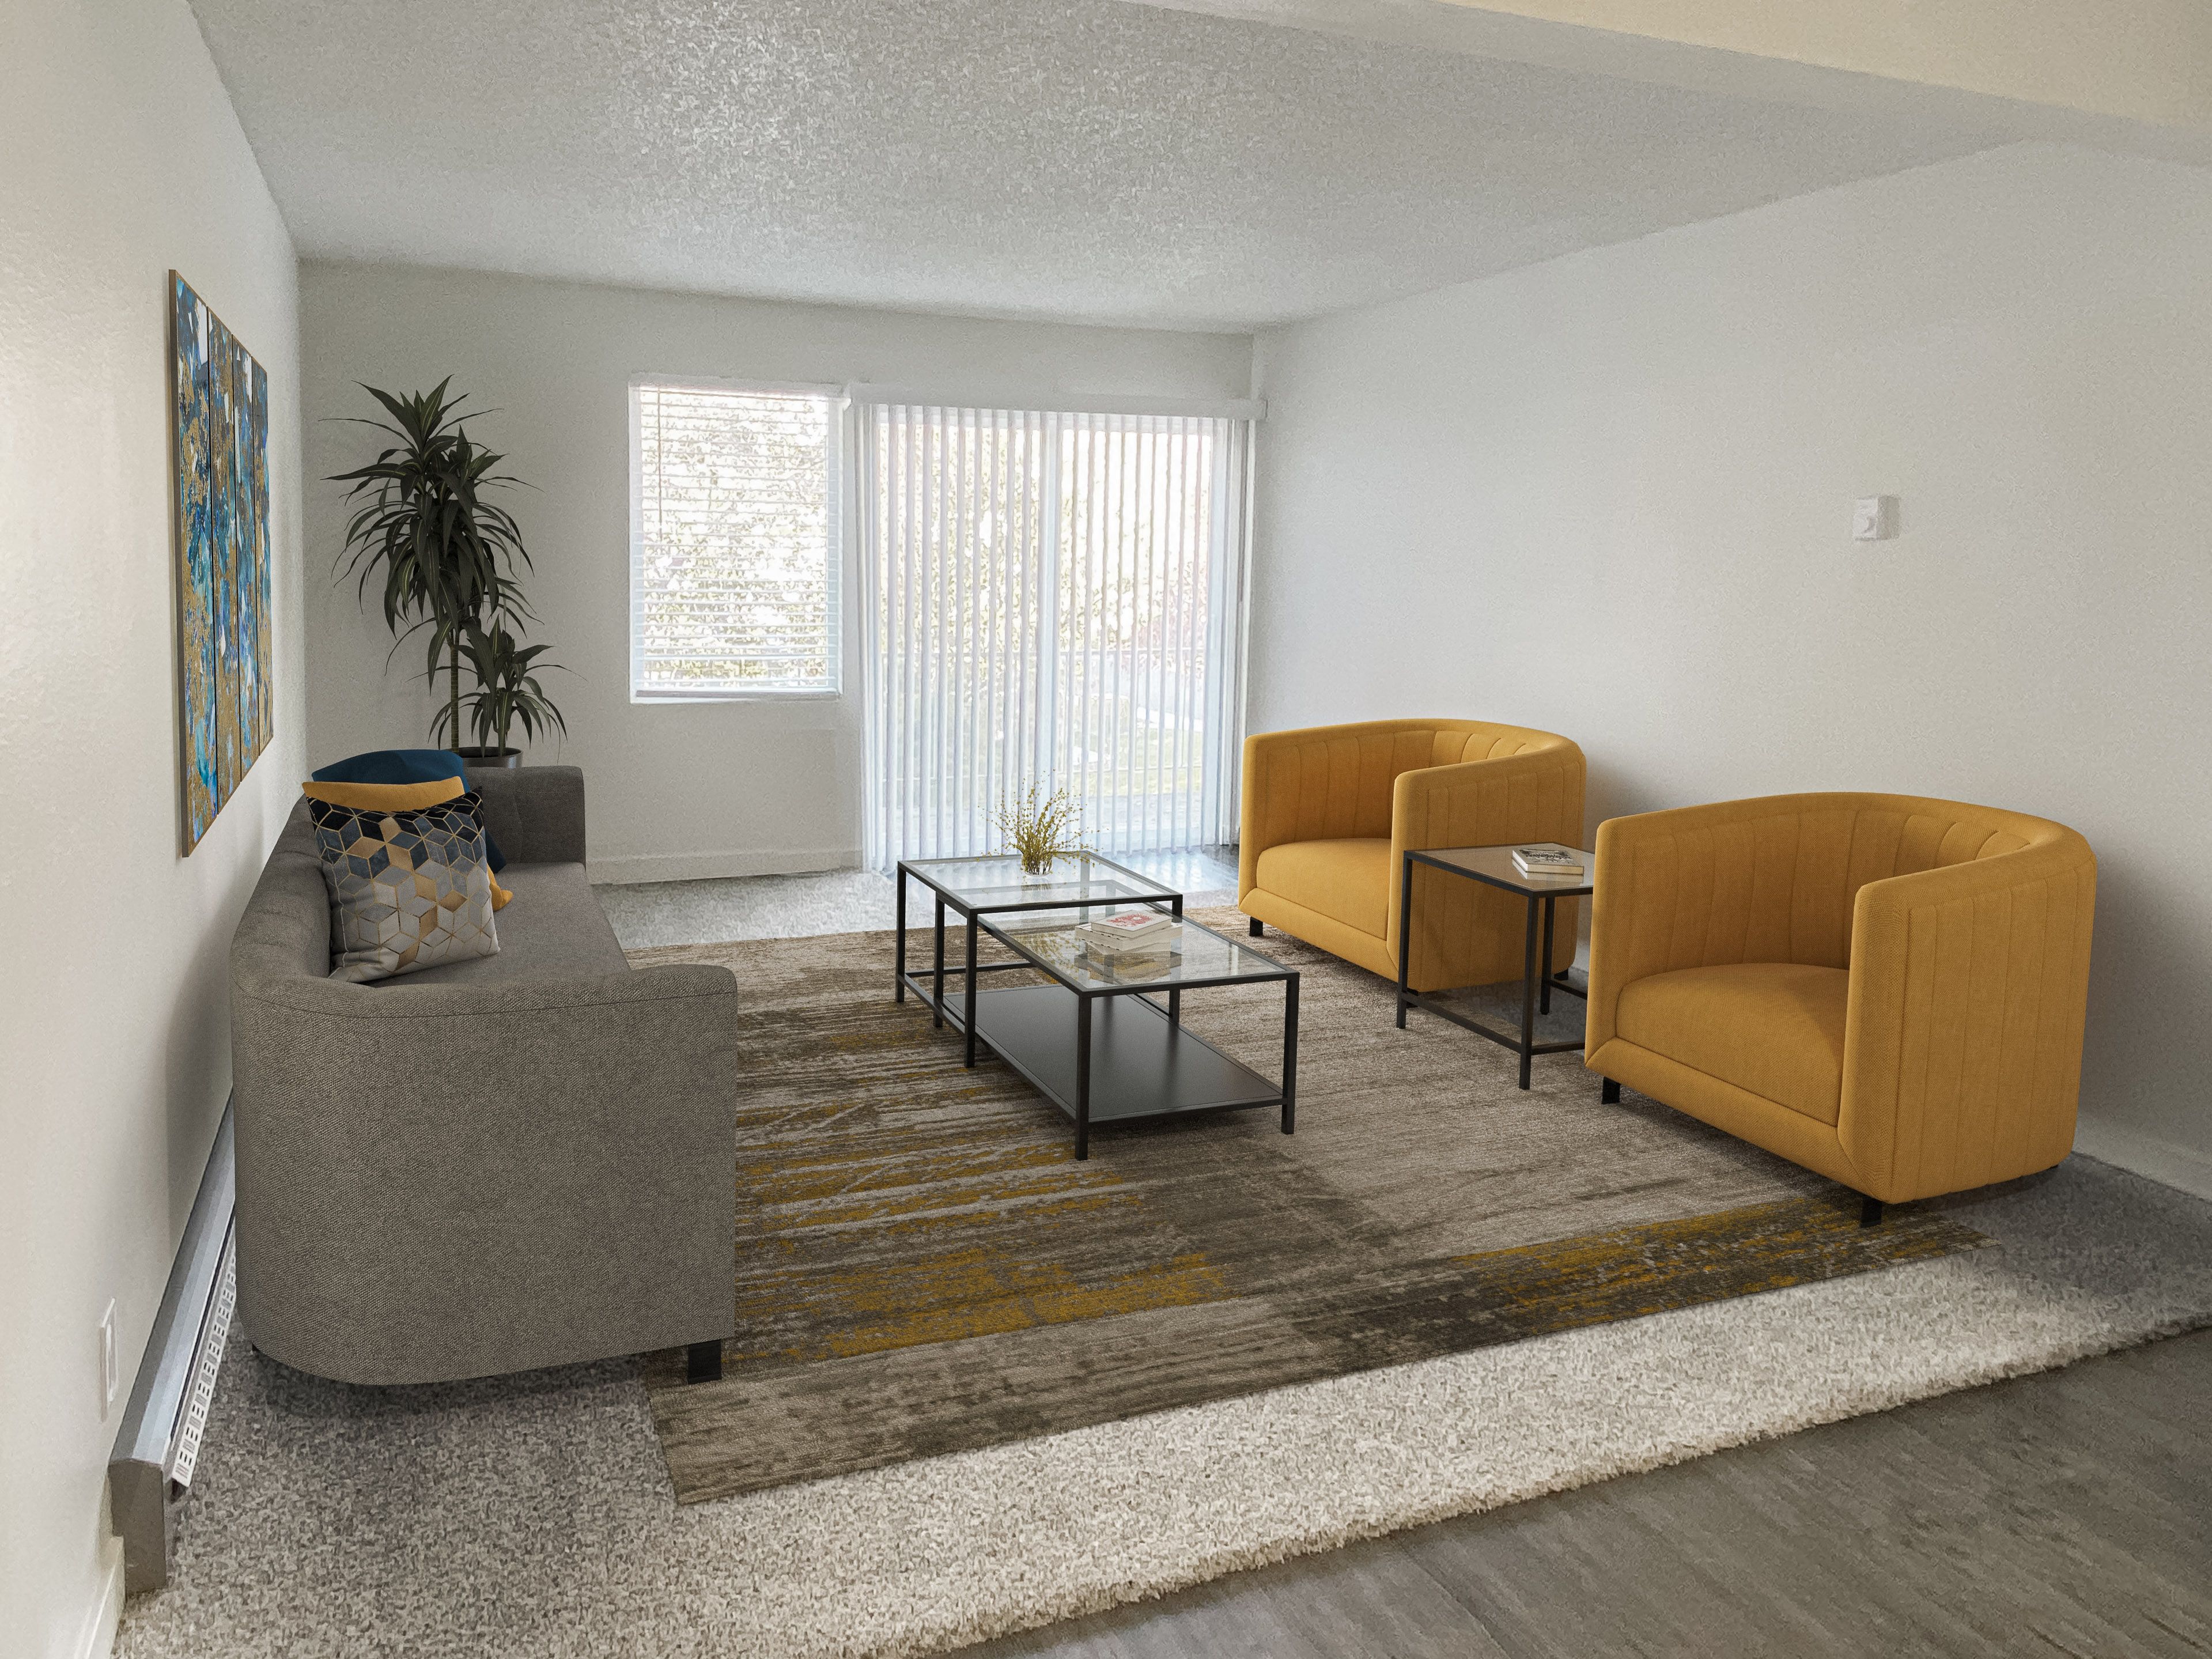 Carpeted living room, large window, sliding glass doors to balcony on back wall, staged with 2 orange chairs, couch, coffee table.at Laurel Park, Twin Falls, ID